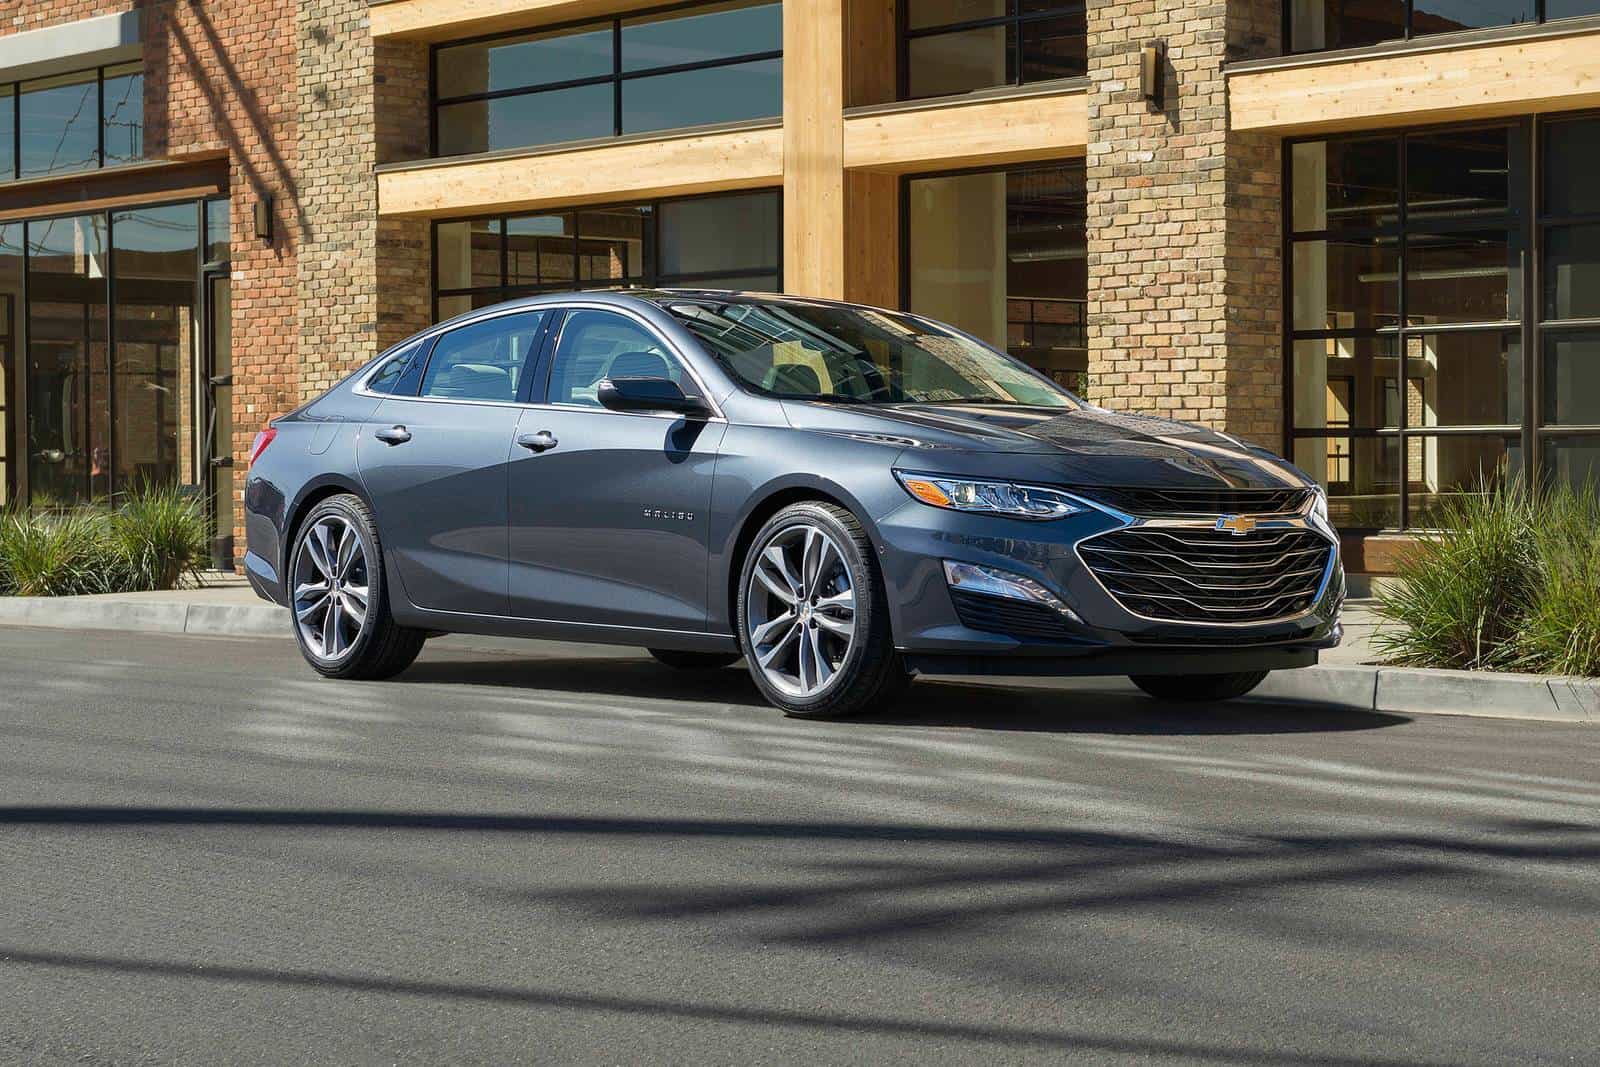 2019 Chevy Malibu Review, Pricing, and Specs